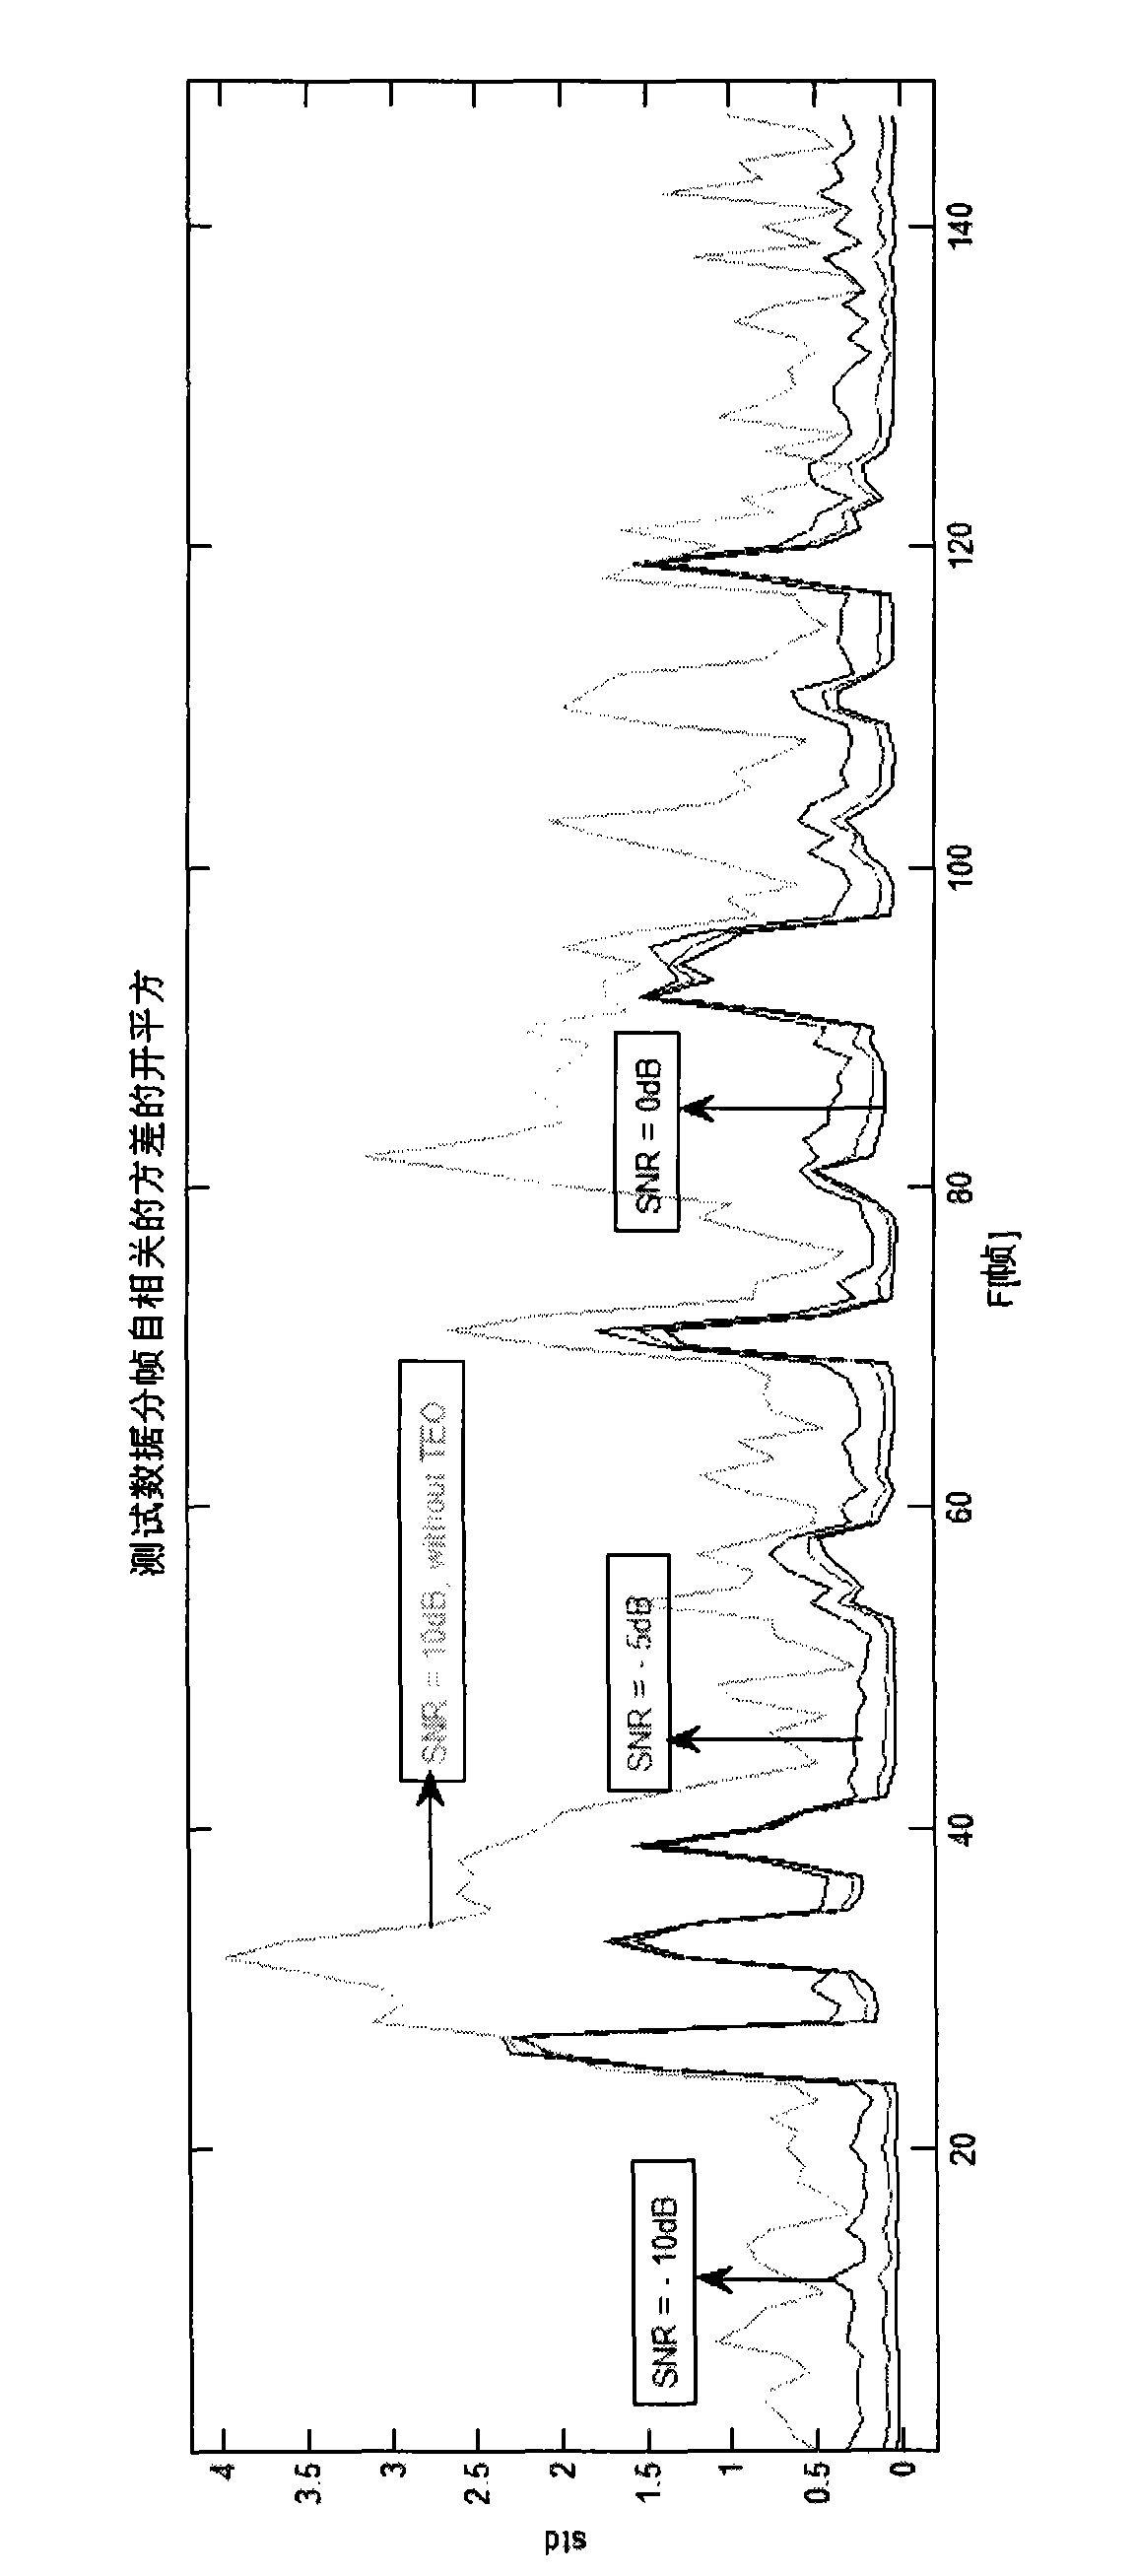 Voice activity detection method in complex background noise